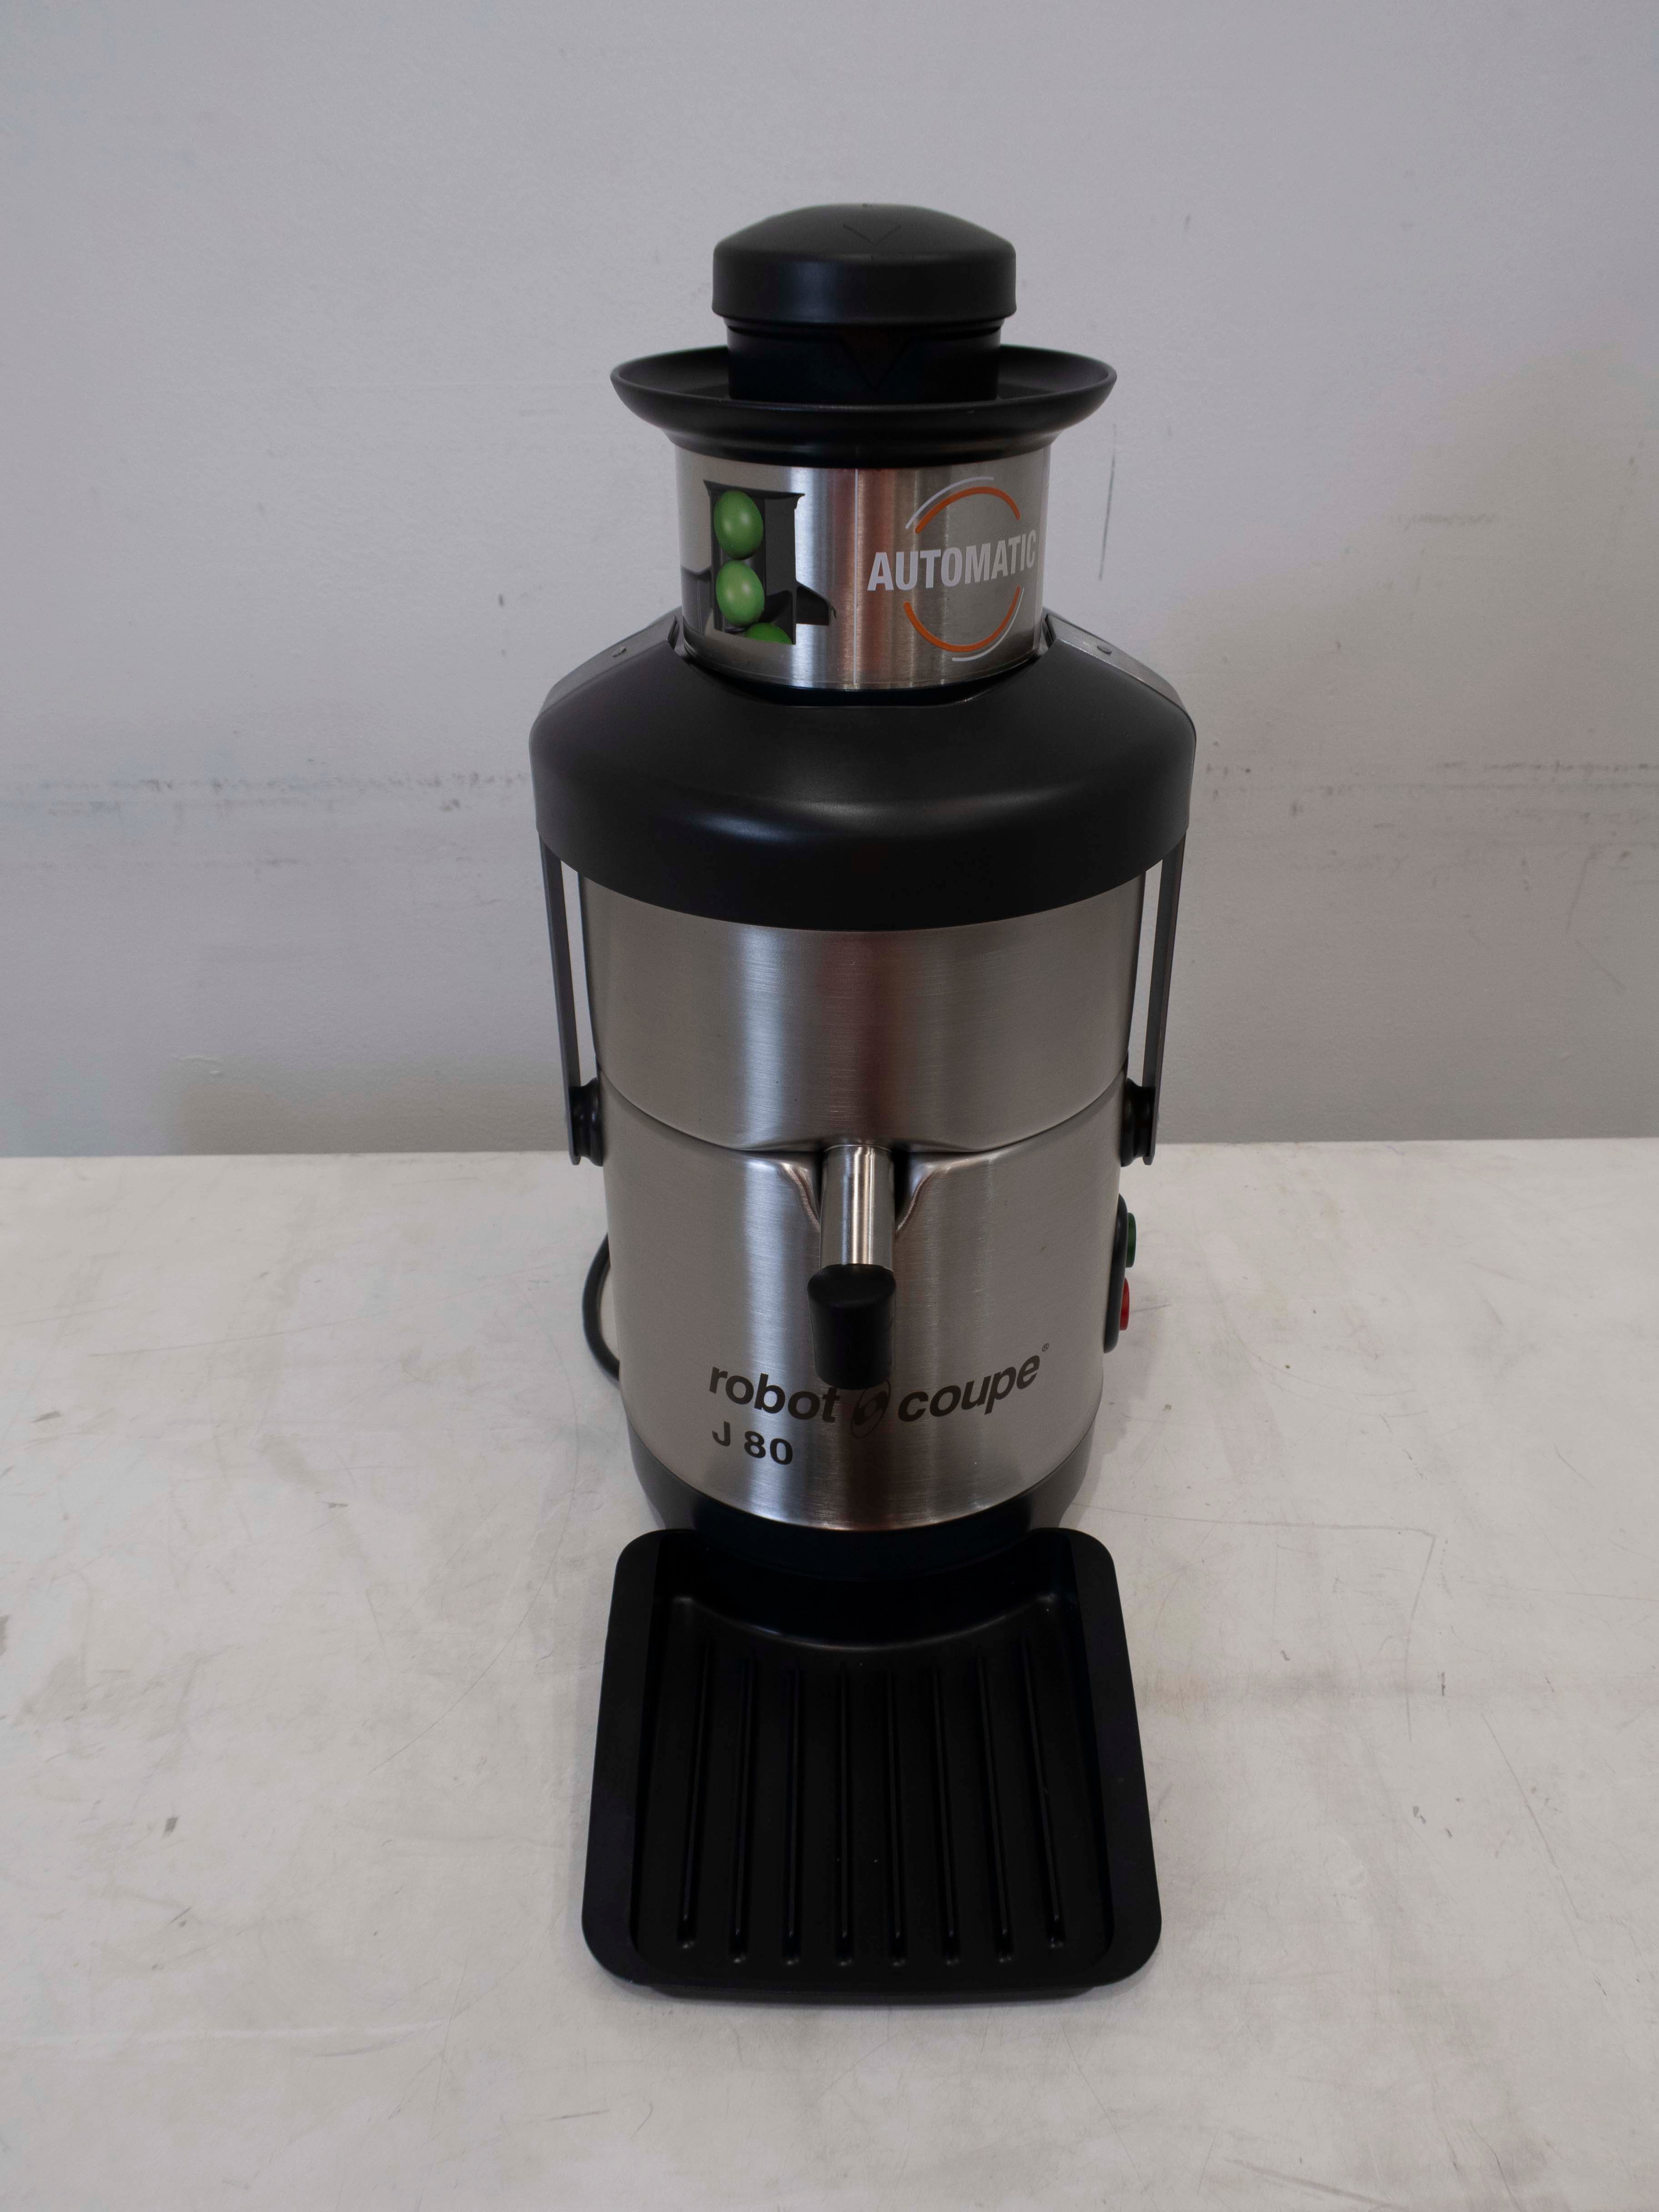 Thumbnail - Robot Coupe J80 Automatic Juice Extractor